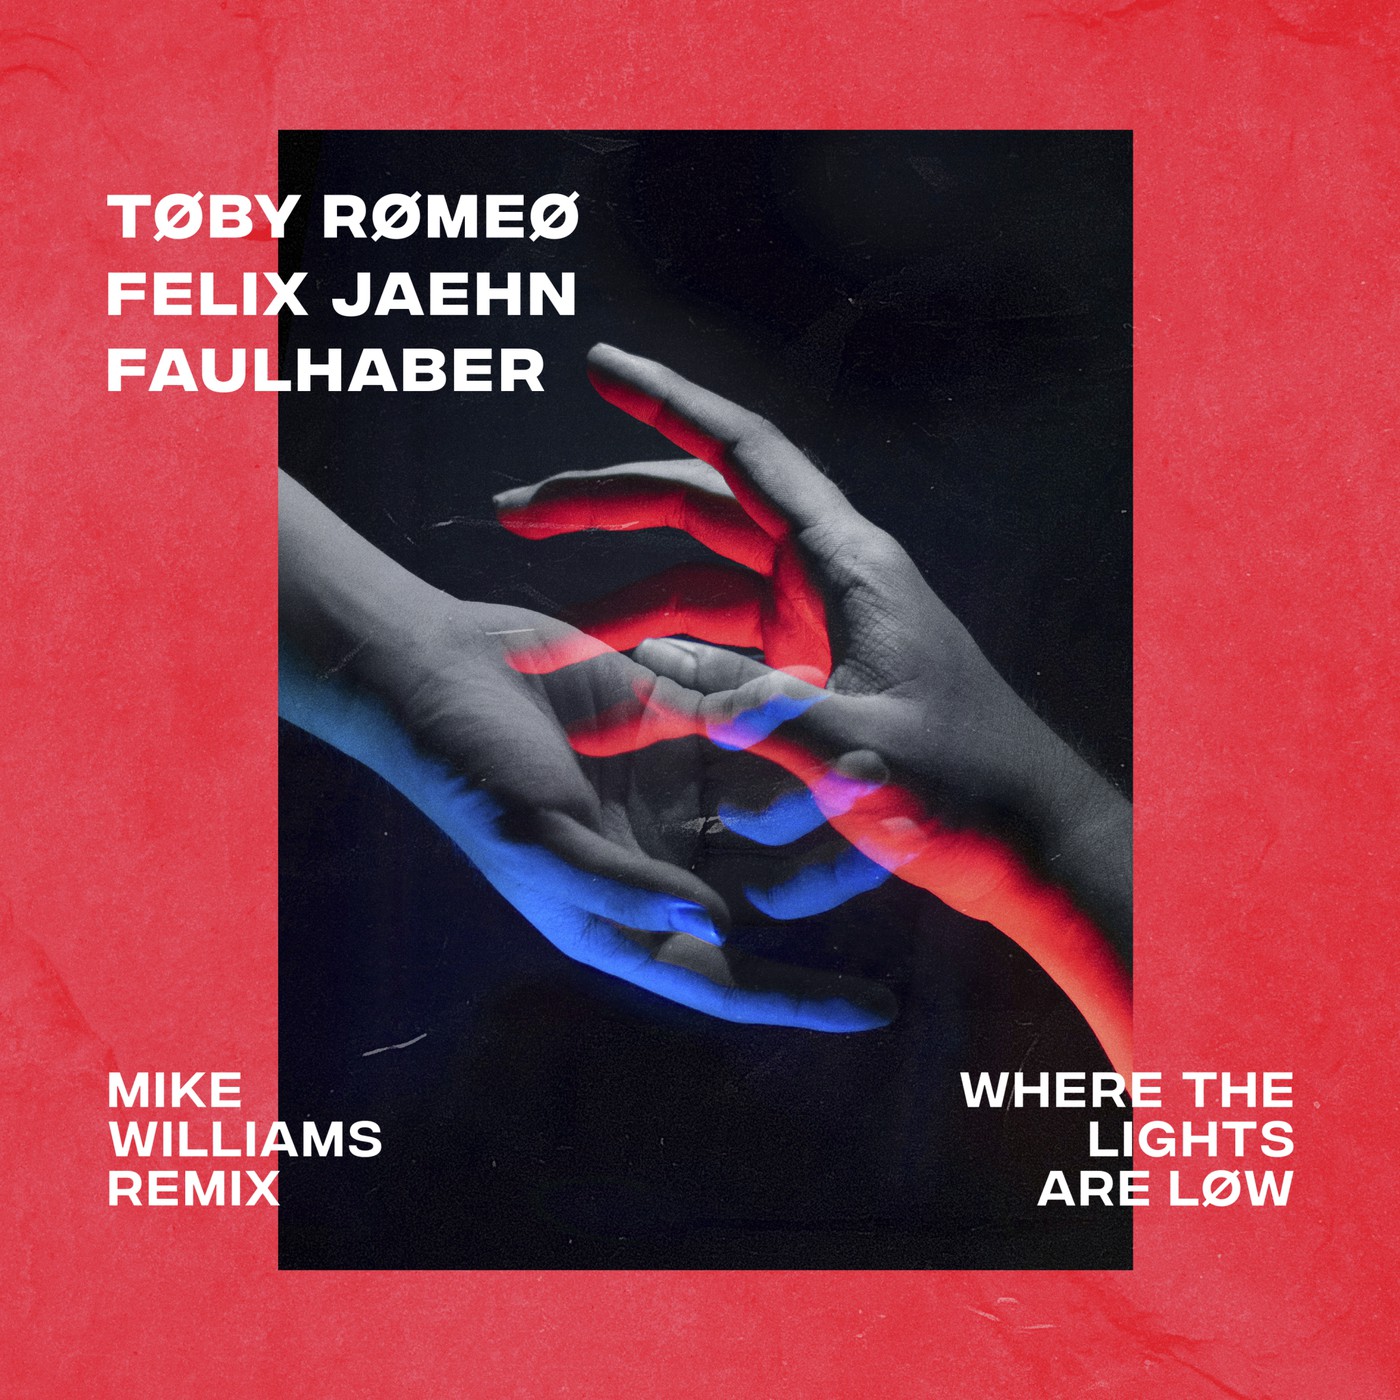 Toby Romeo, Felix Jaehn, FAULHABER - Where The Lights Are Low (Mike Williams Remix)